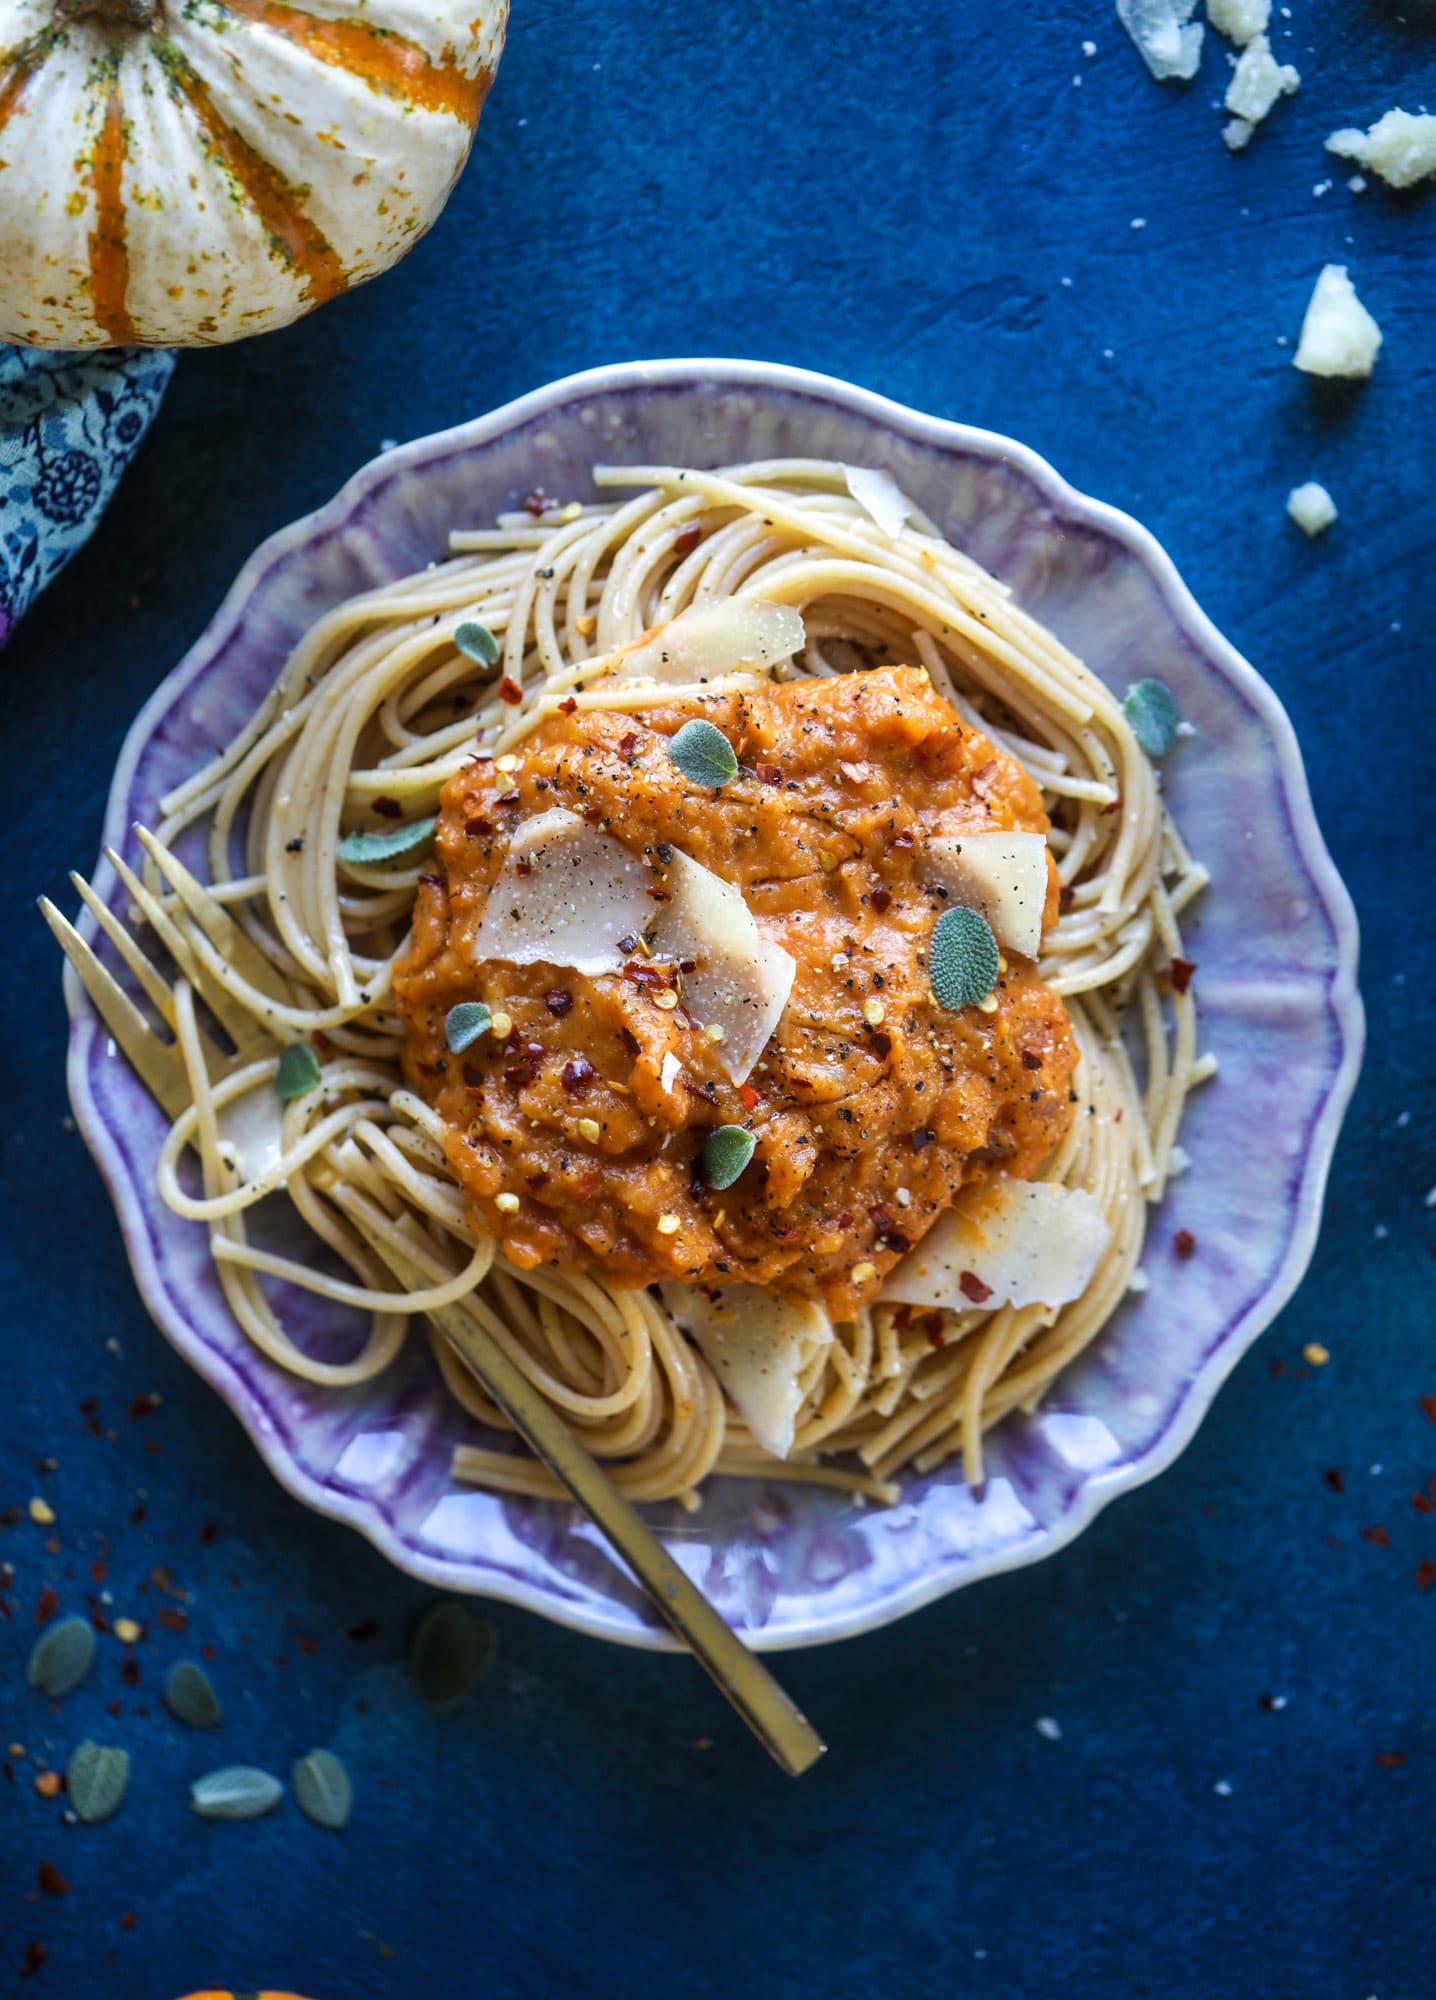 This butternut squash pasta sauce is heaven for an October dinner! Fire roasted tomatoes, butternut squash, pumpkin, sage, spice and parmesan all come together to create a delicious, simmered pot of sauce to blanket your favorite pasta! I howsweeteats.com #butternut #squash #pasta #sauce